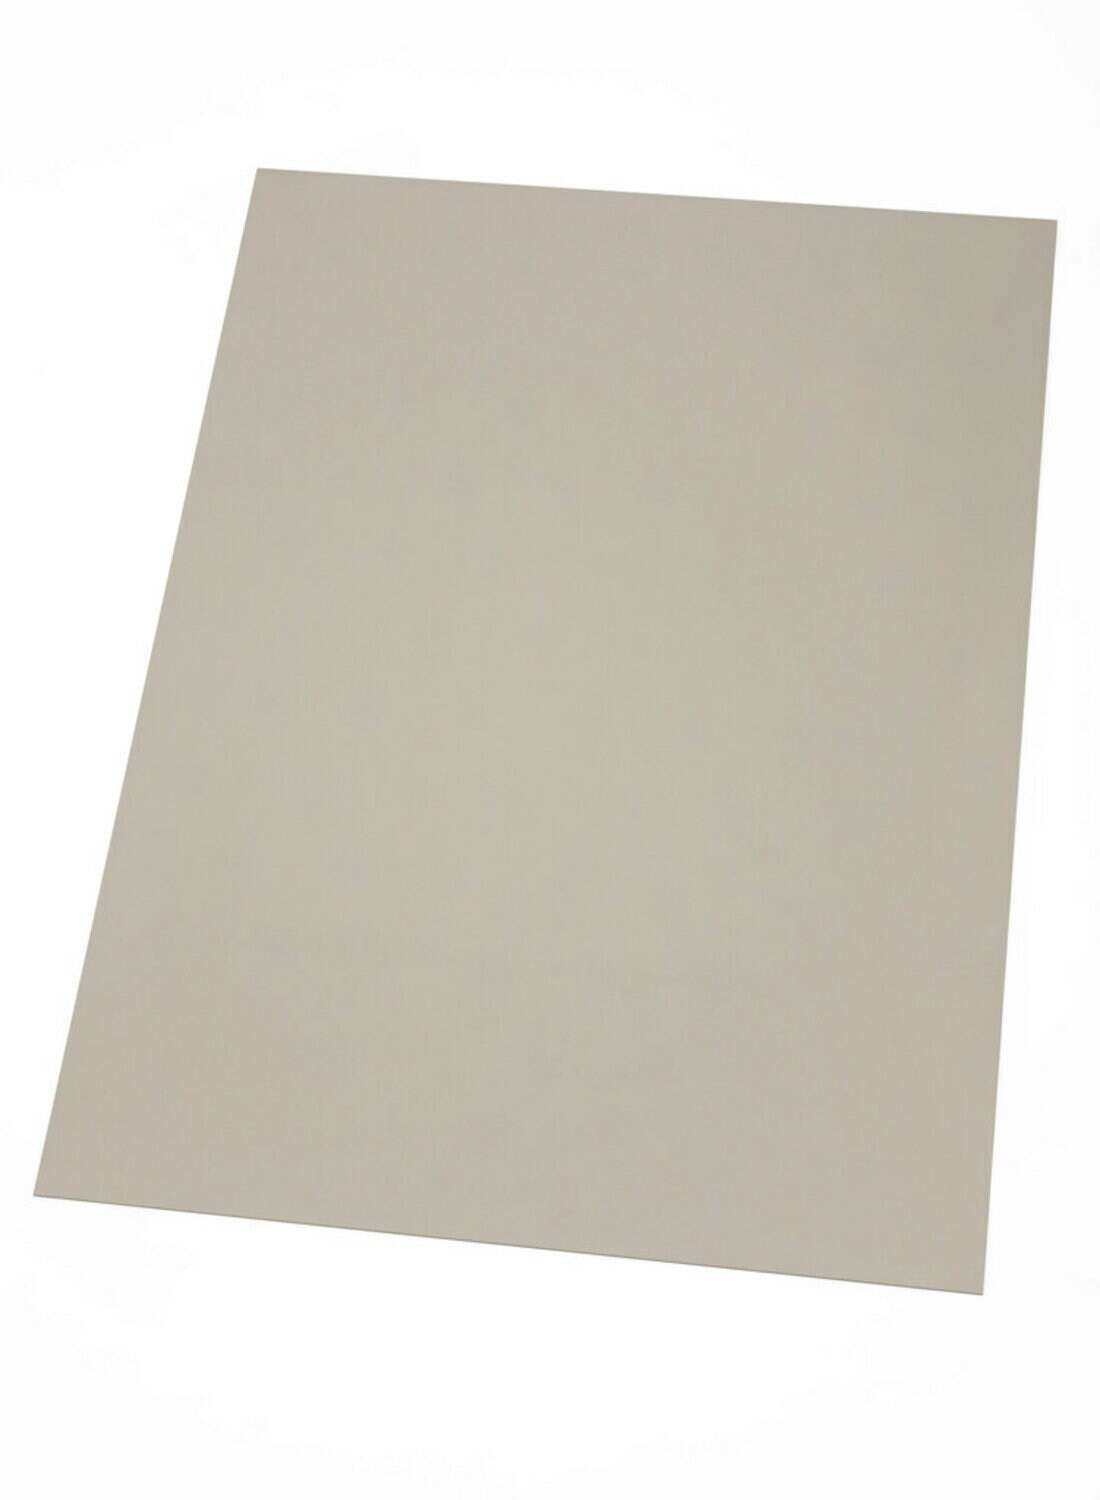 7100098713 - 3M Thermally Conductive Acrylic Interface Pad 5570N-15, 300 mm x 20 m x
0.5 mm, 1/Case